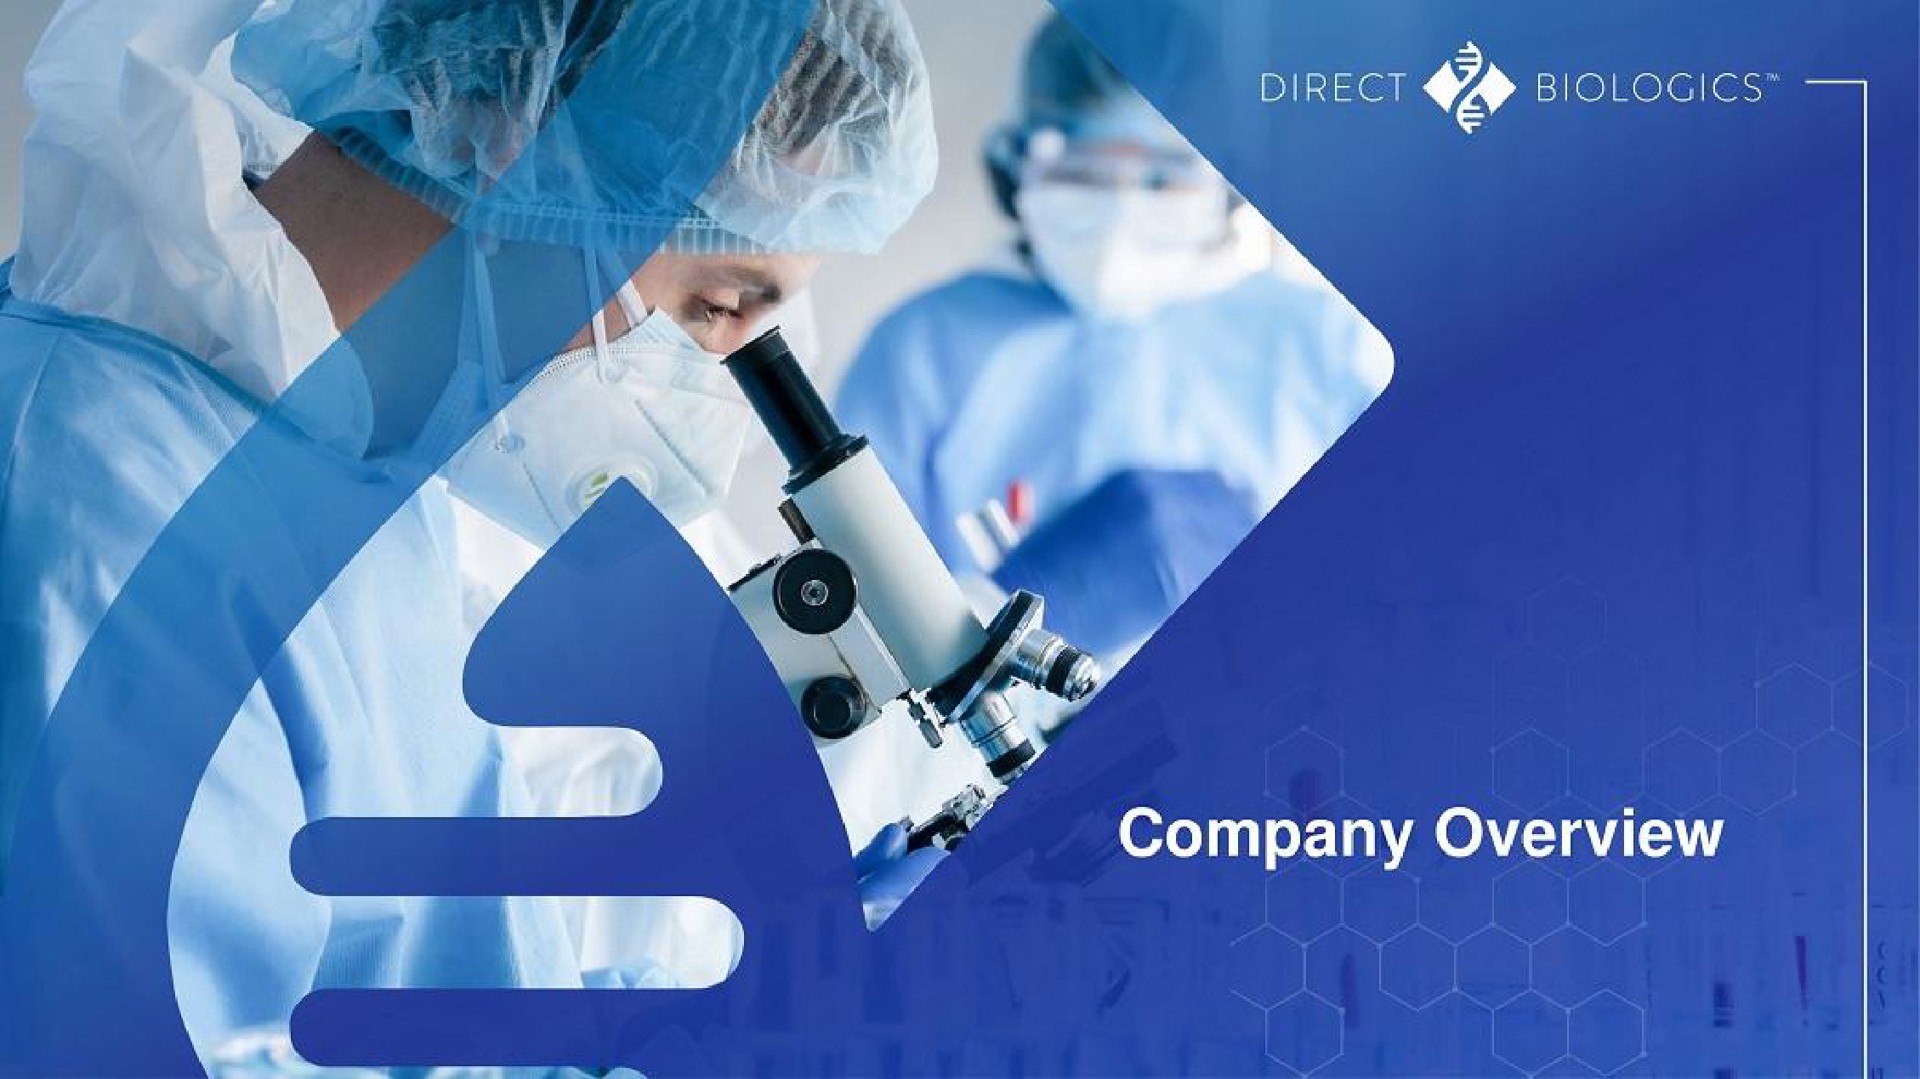 direct company overview | Direct Biologics